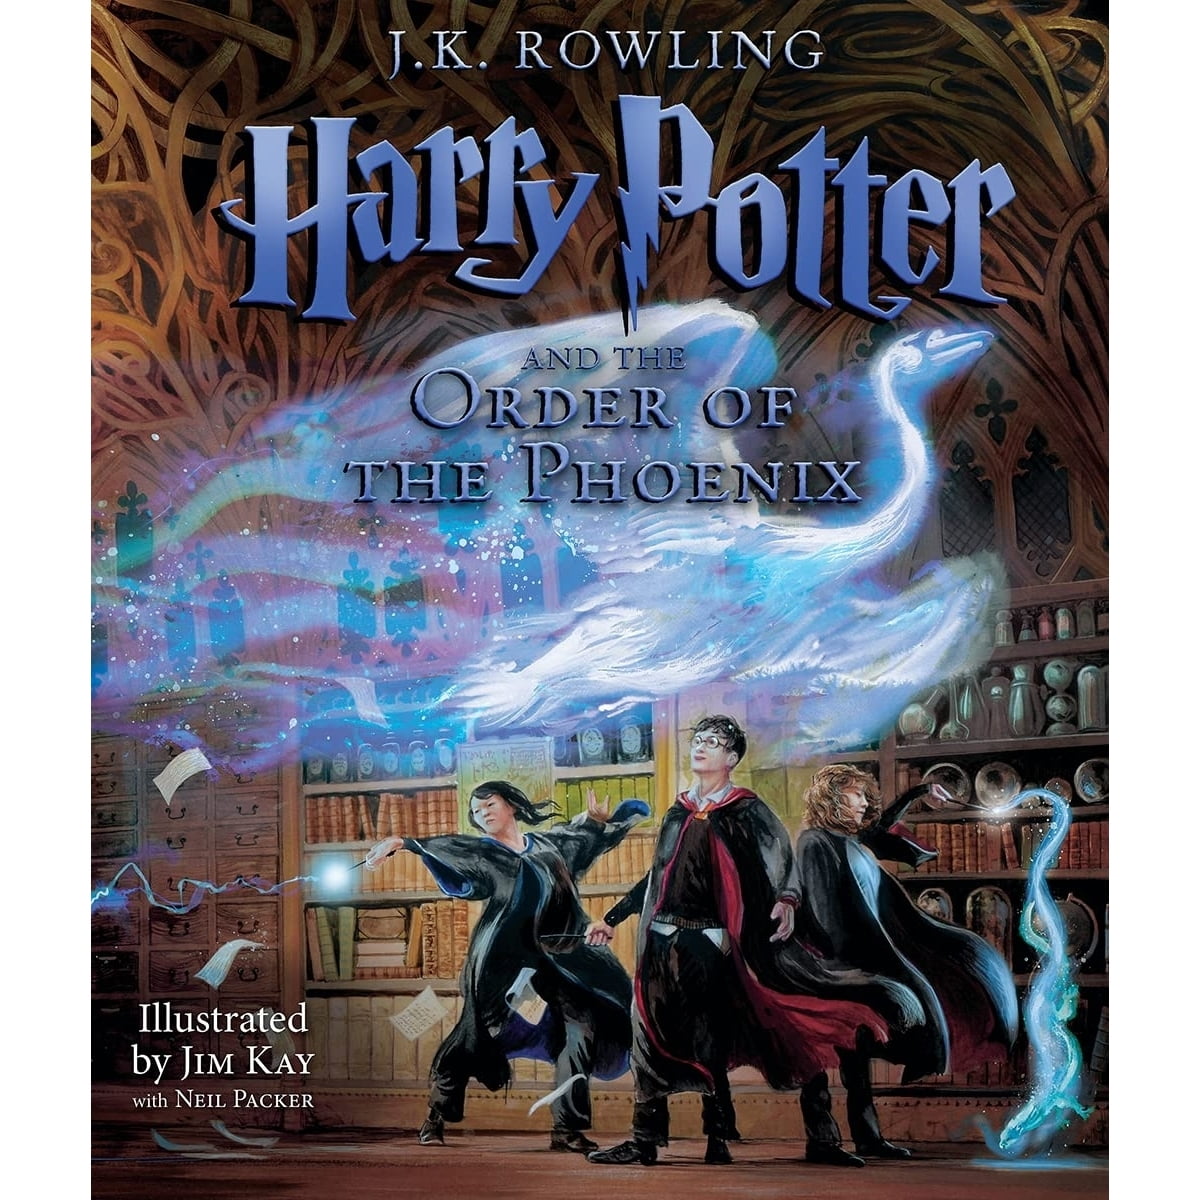 Harry Potter: From Book Series to Global Brand